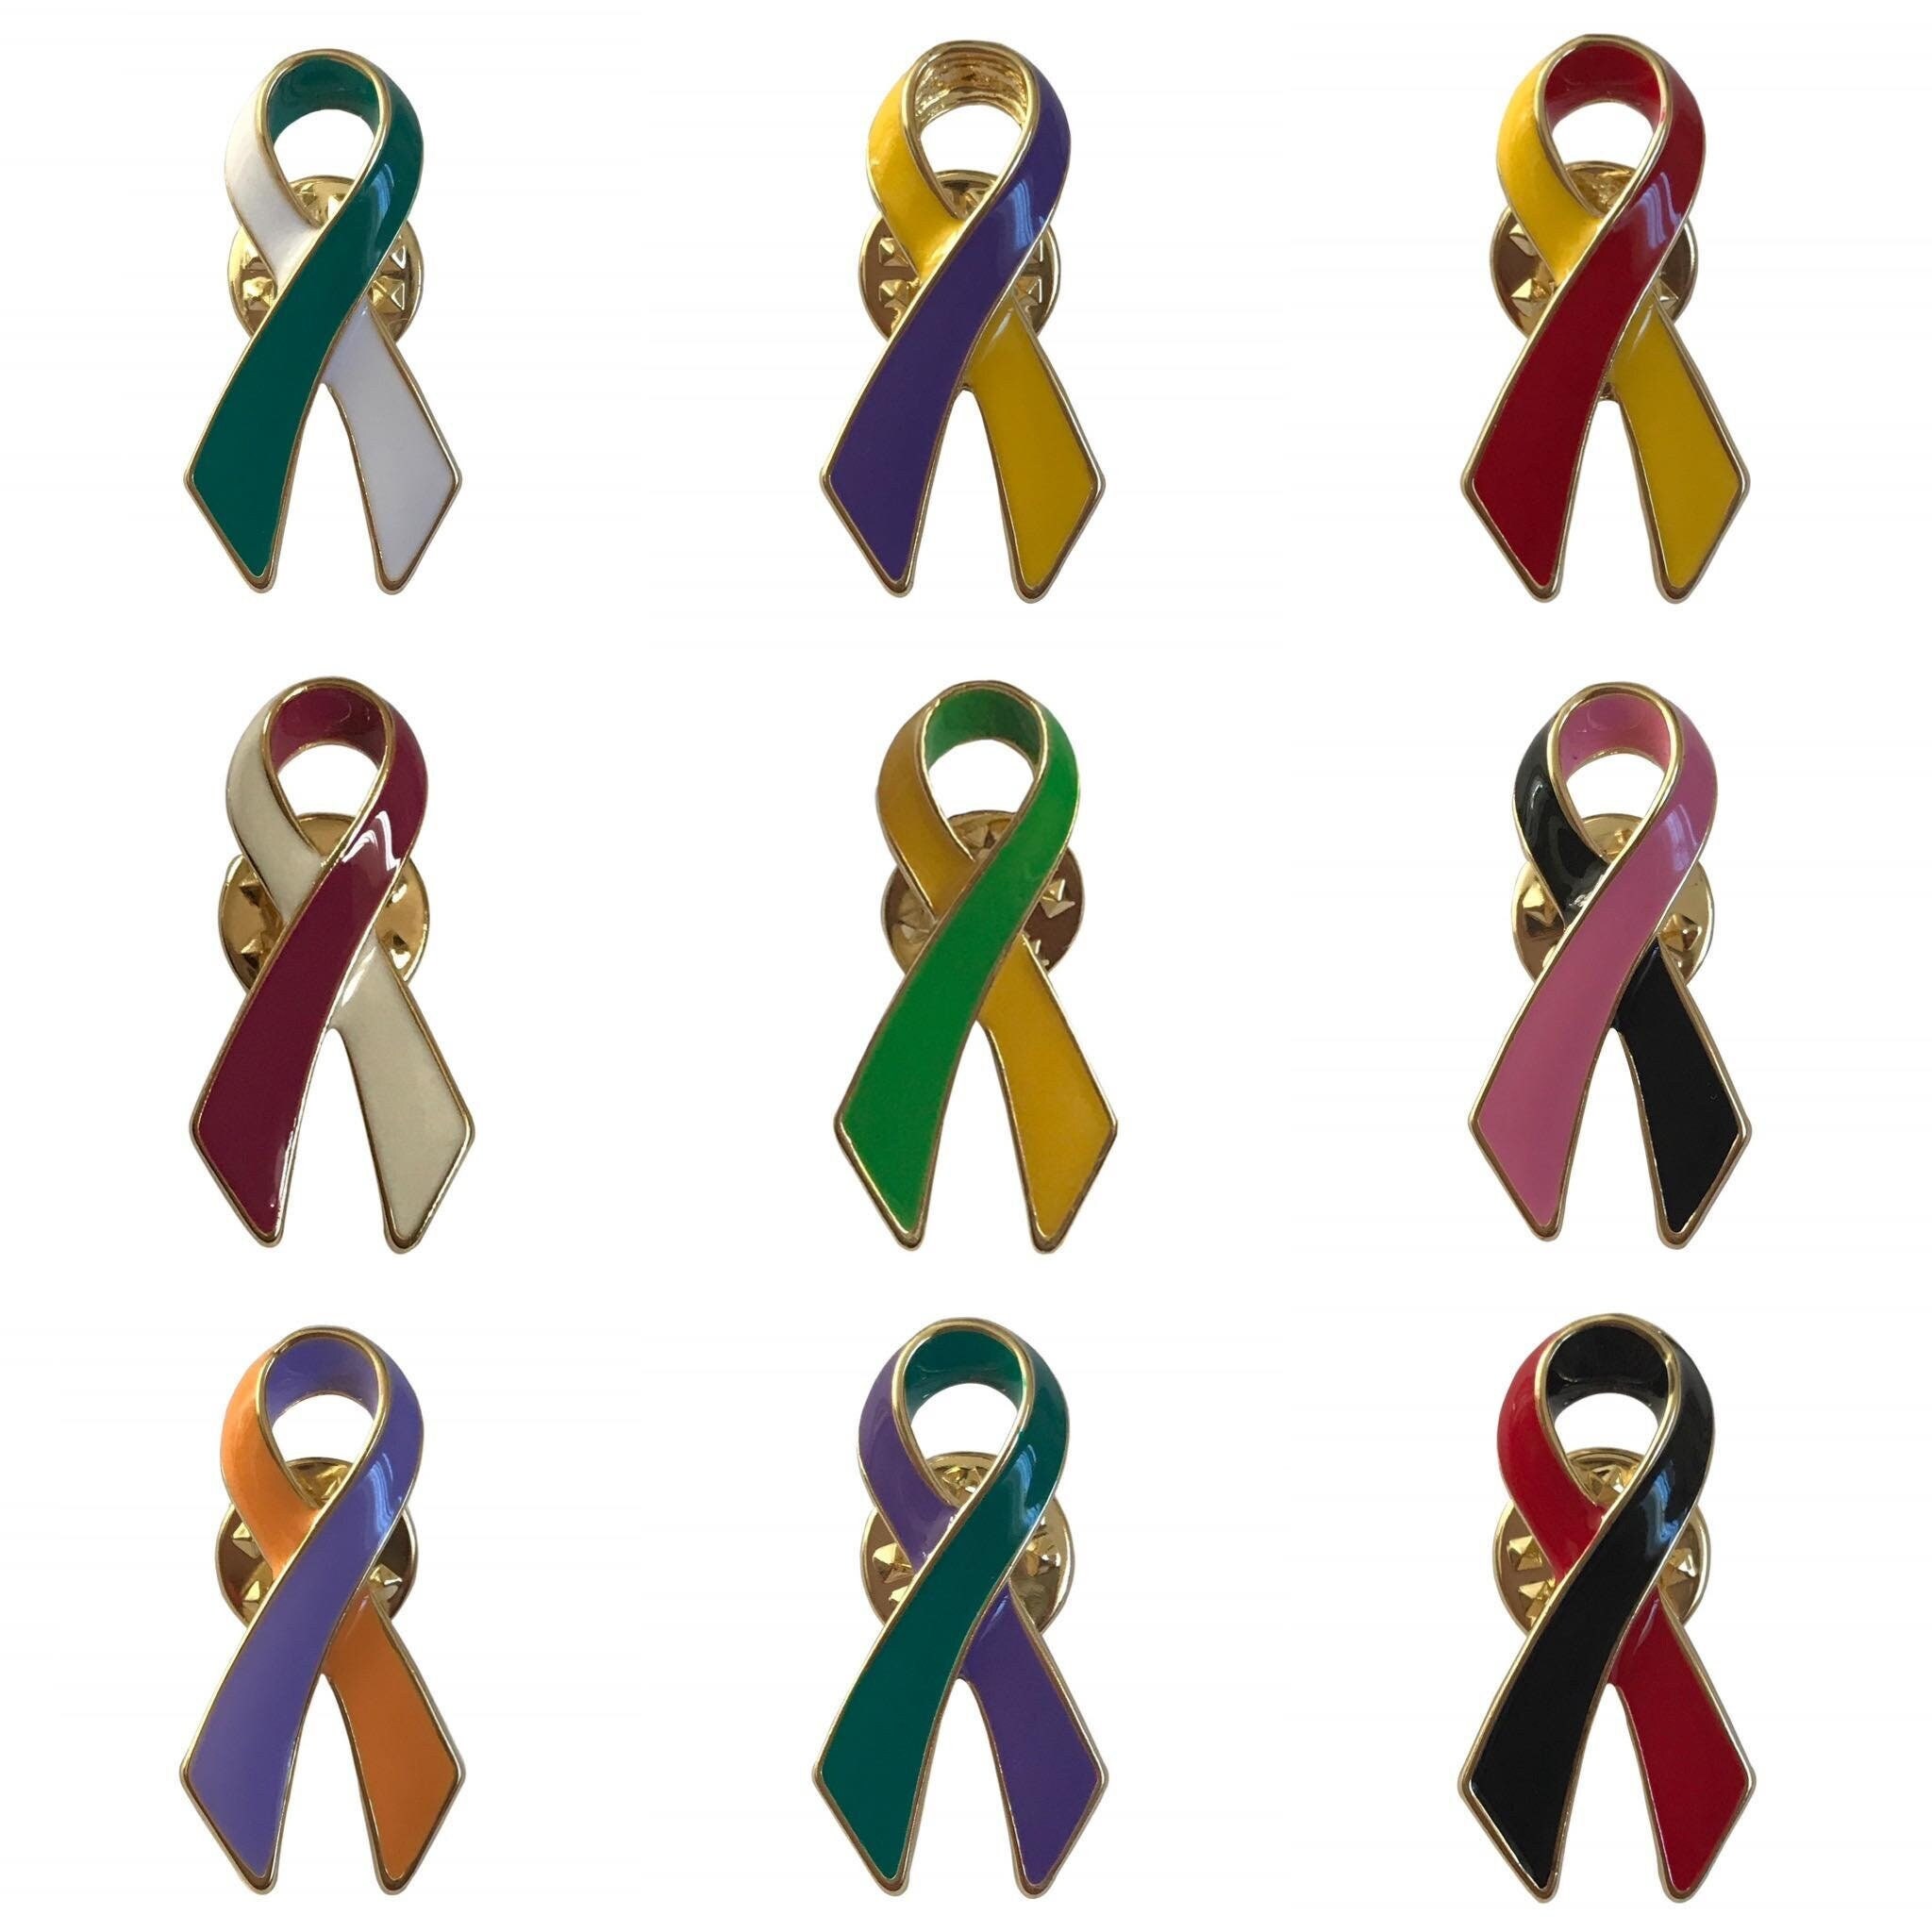 White Awareness Ribbon Lung Cancer, Bone Cancer, Postpartum Depression,  Osteoporosis, Purity, Emphysema, Lung Disease 